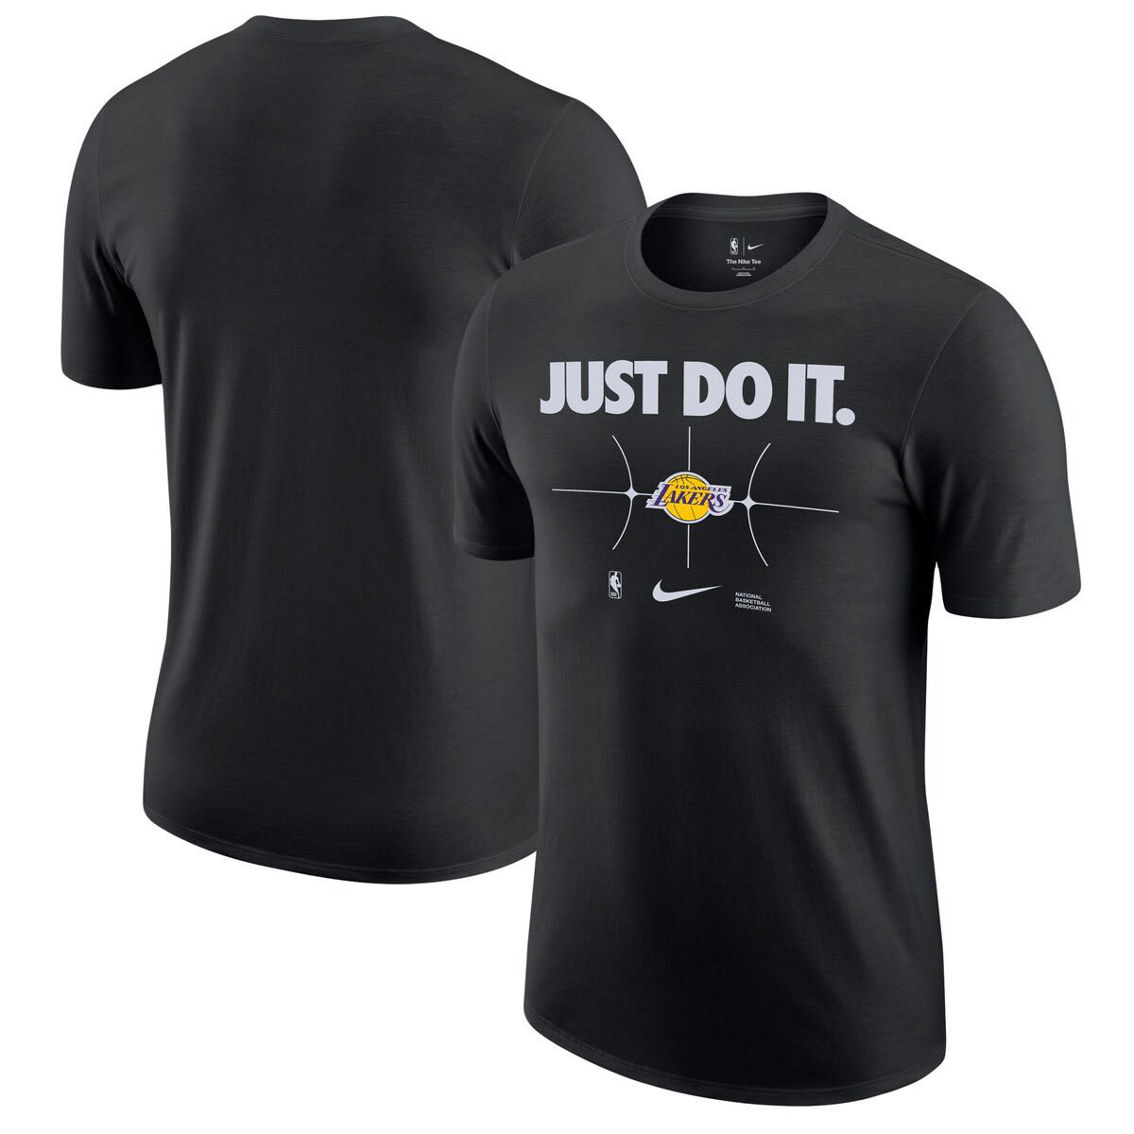 Nike Men's Black Los Angeles Lakers Just Do It T-Shirt - Image 2 of 4